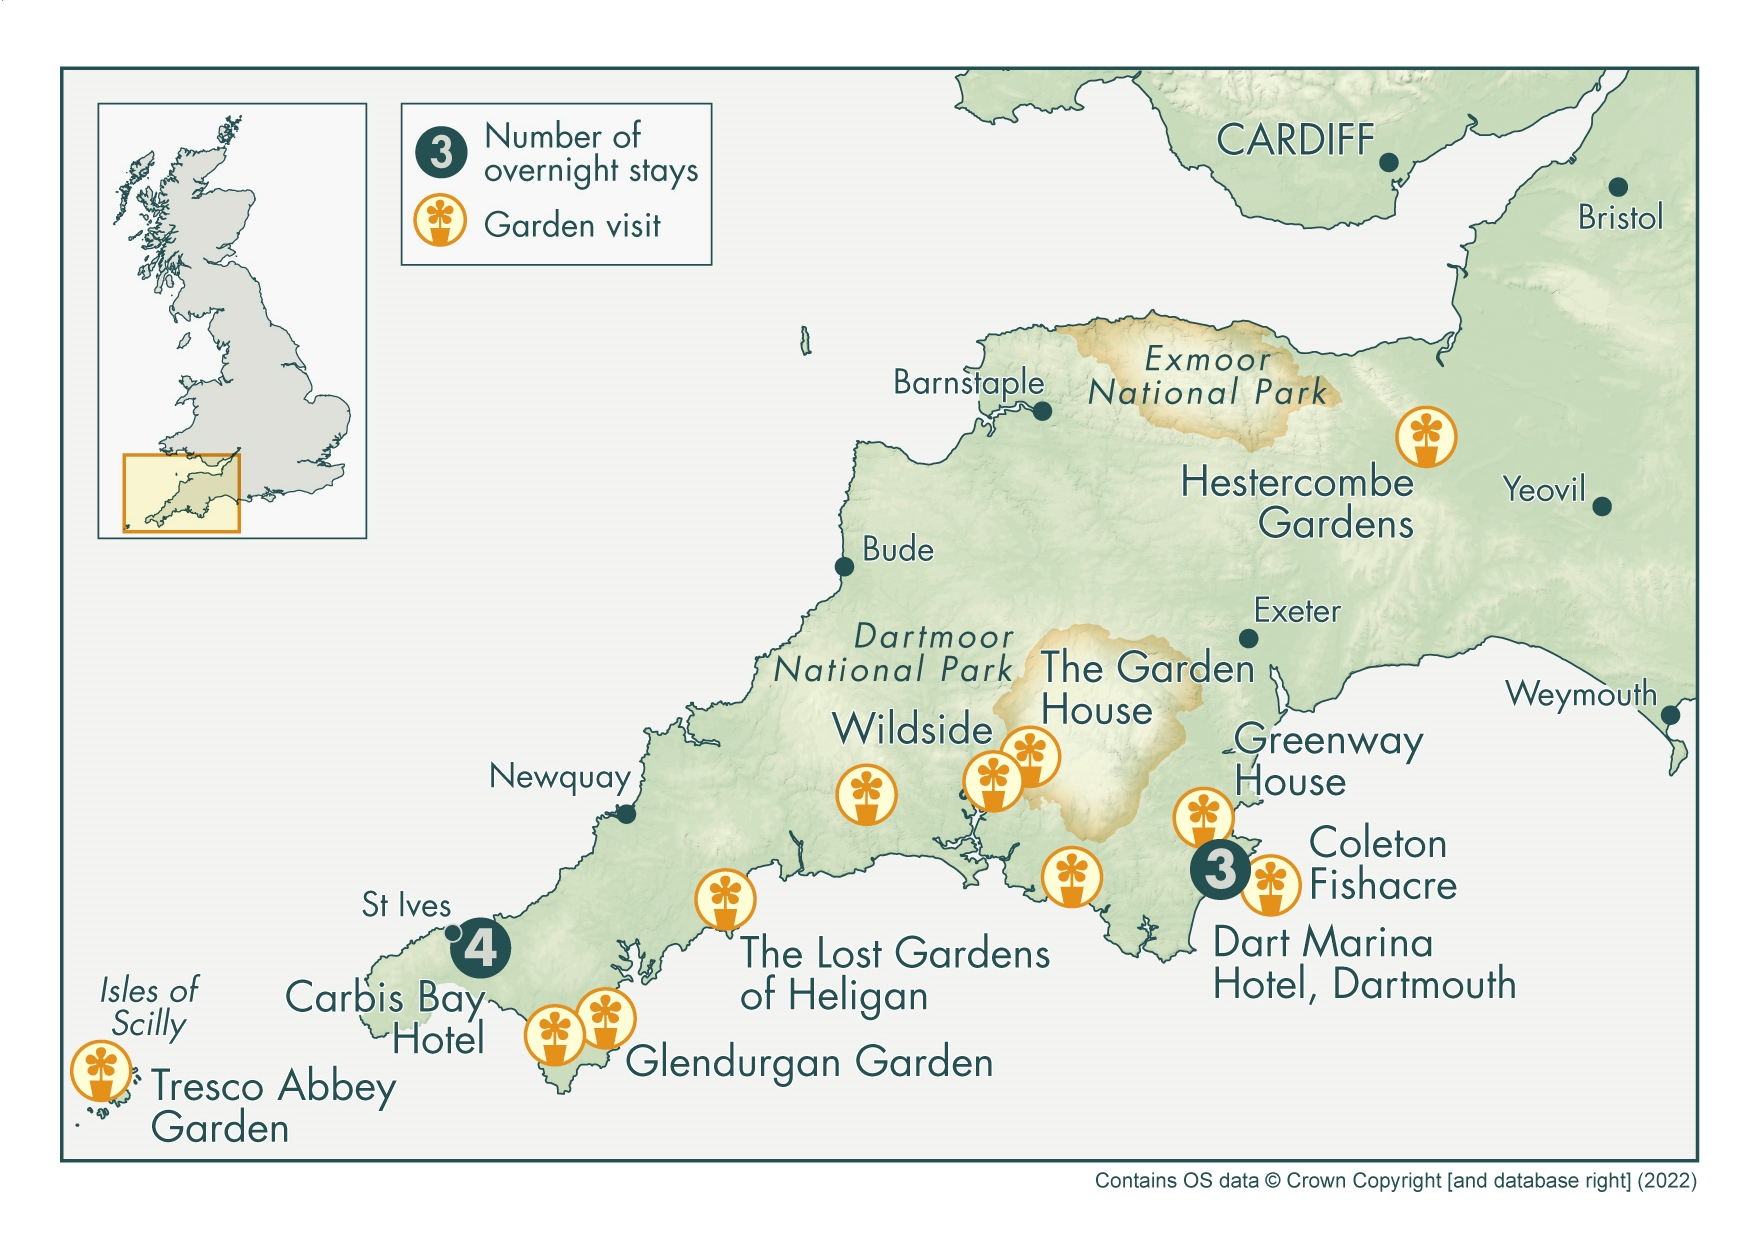 map of cornwall showing garden locations